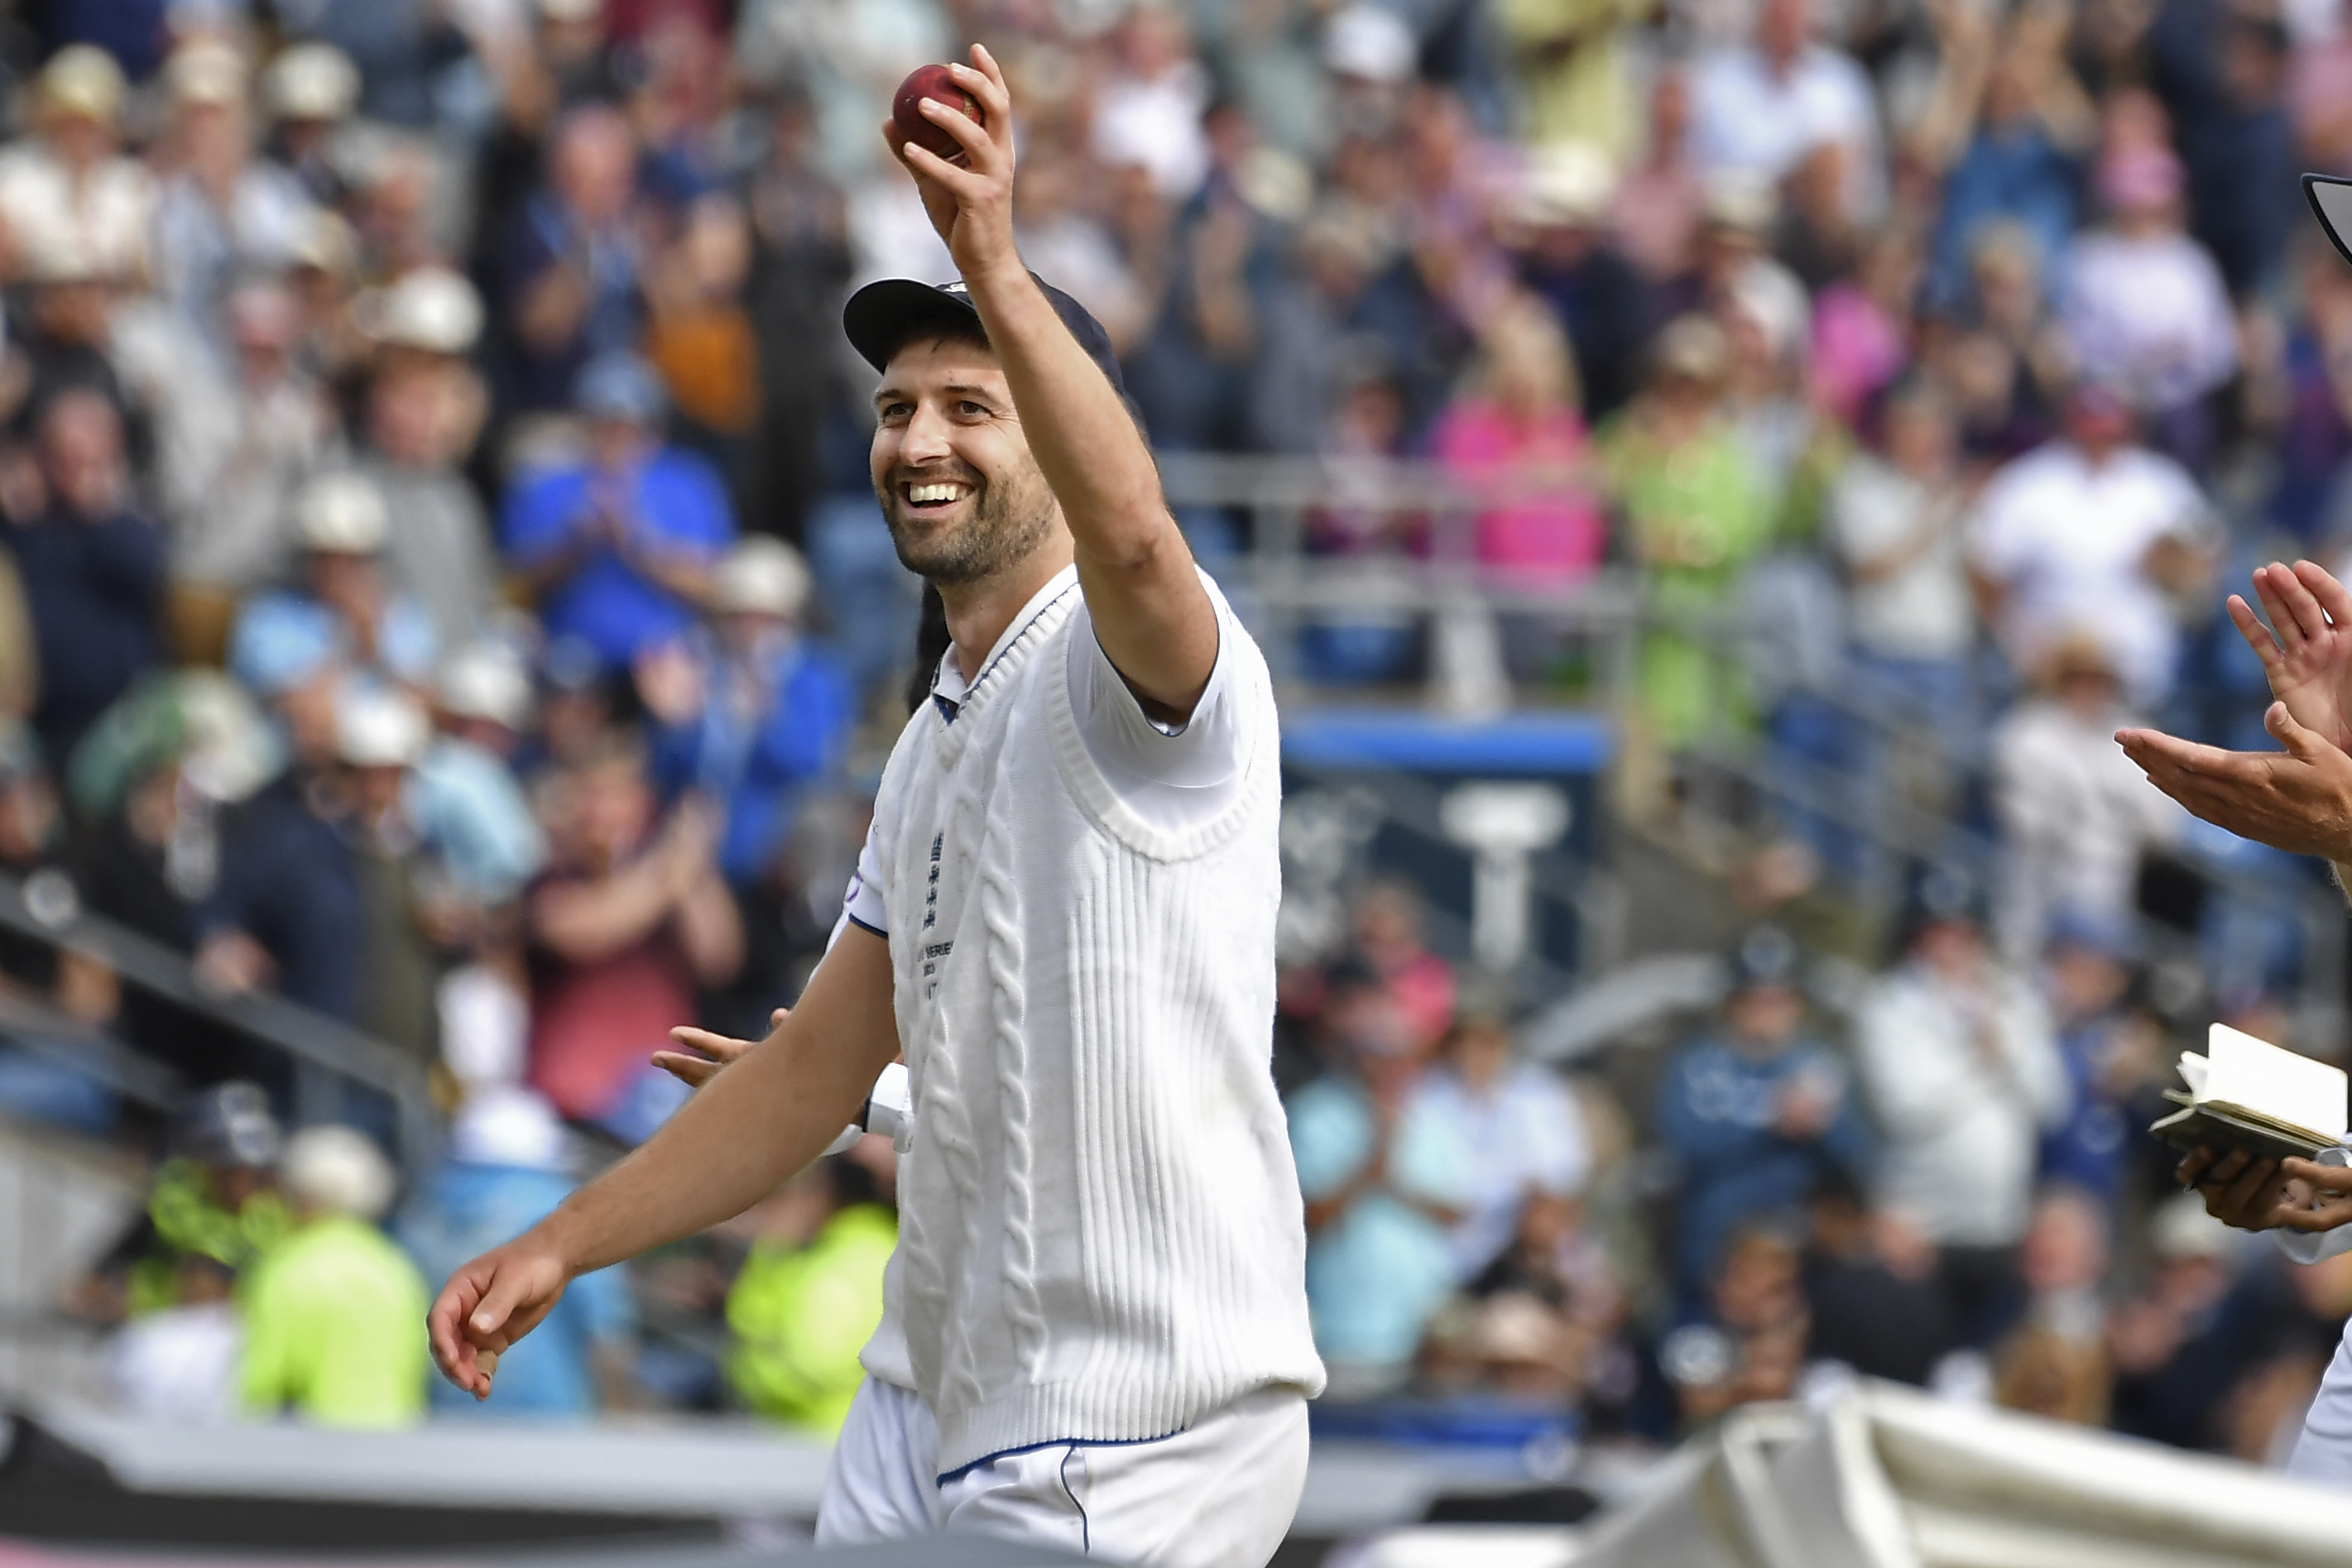 Mitch Marsh celebrated his test comeback by smashing a century and taking a wicket as Australia led England by 195 runs after day one of the third Ashes test at Headingley on Thursday. Marsh's scintillating run-a-ball 118 rescued Australia from 85-4. To put it in perspective, the allrounder and Travis Head combined for 155 runs. The rest of the team scored 108.